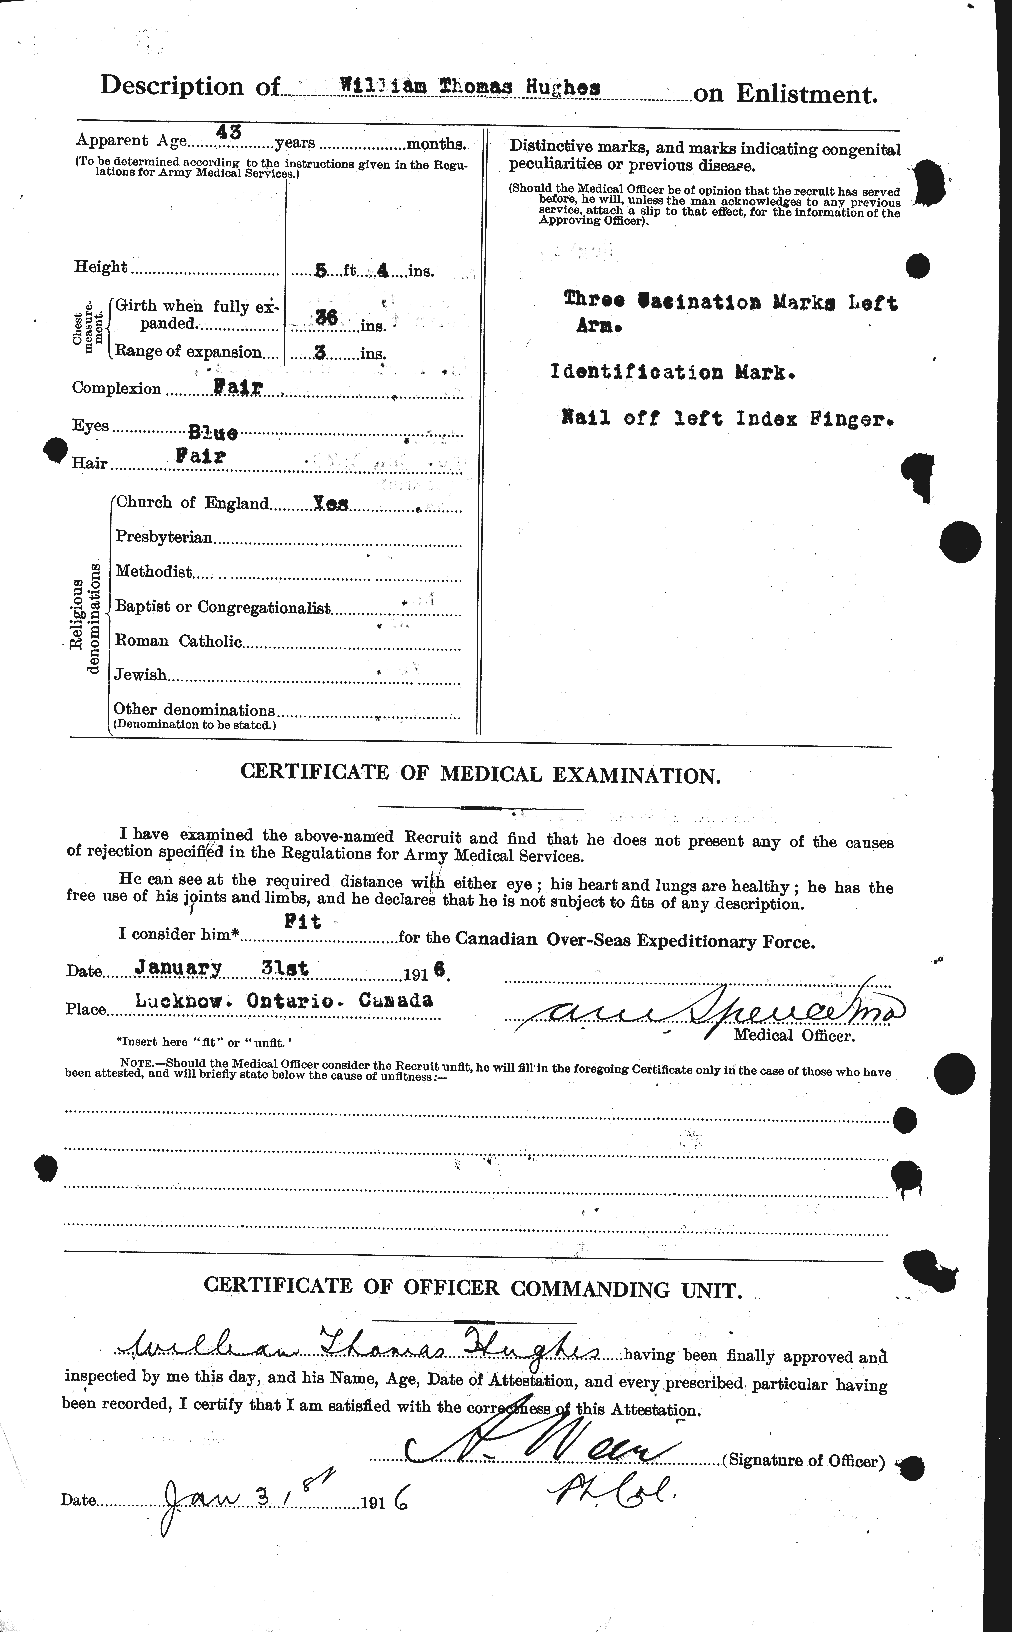 Personnel Records of the First World War - CEF 405961b